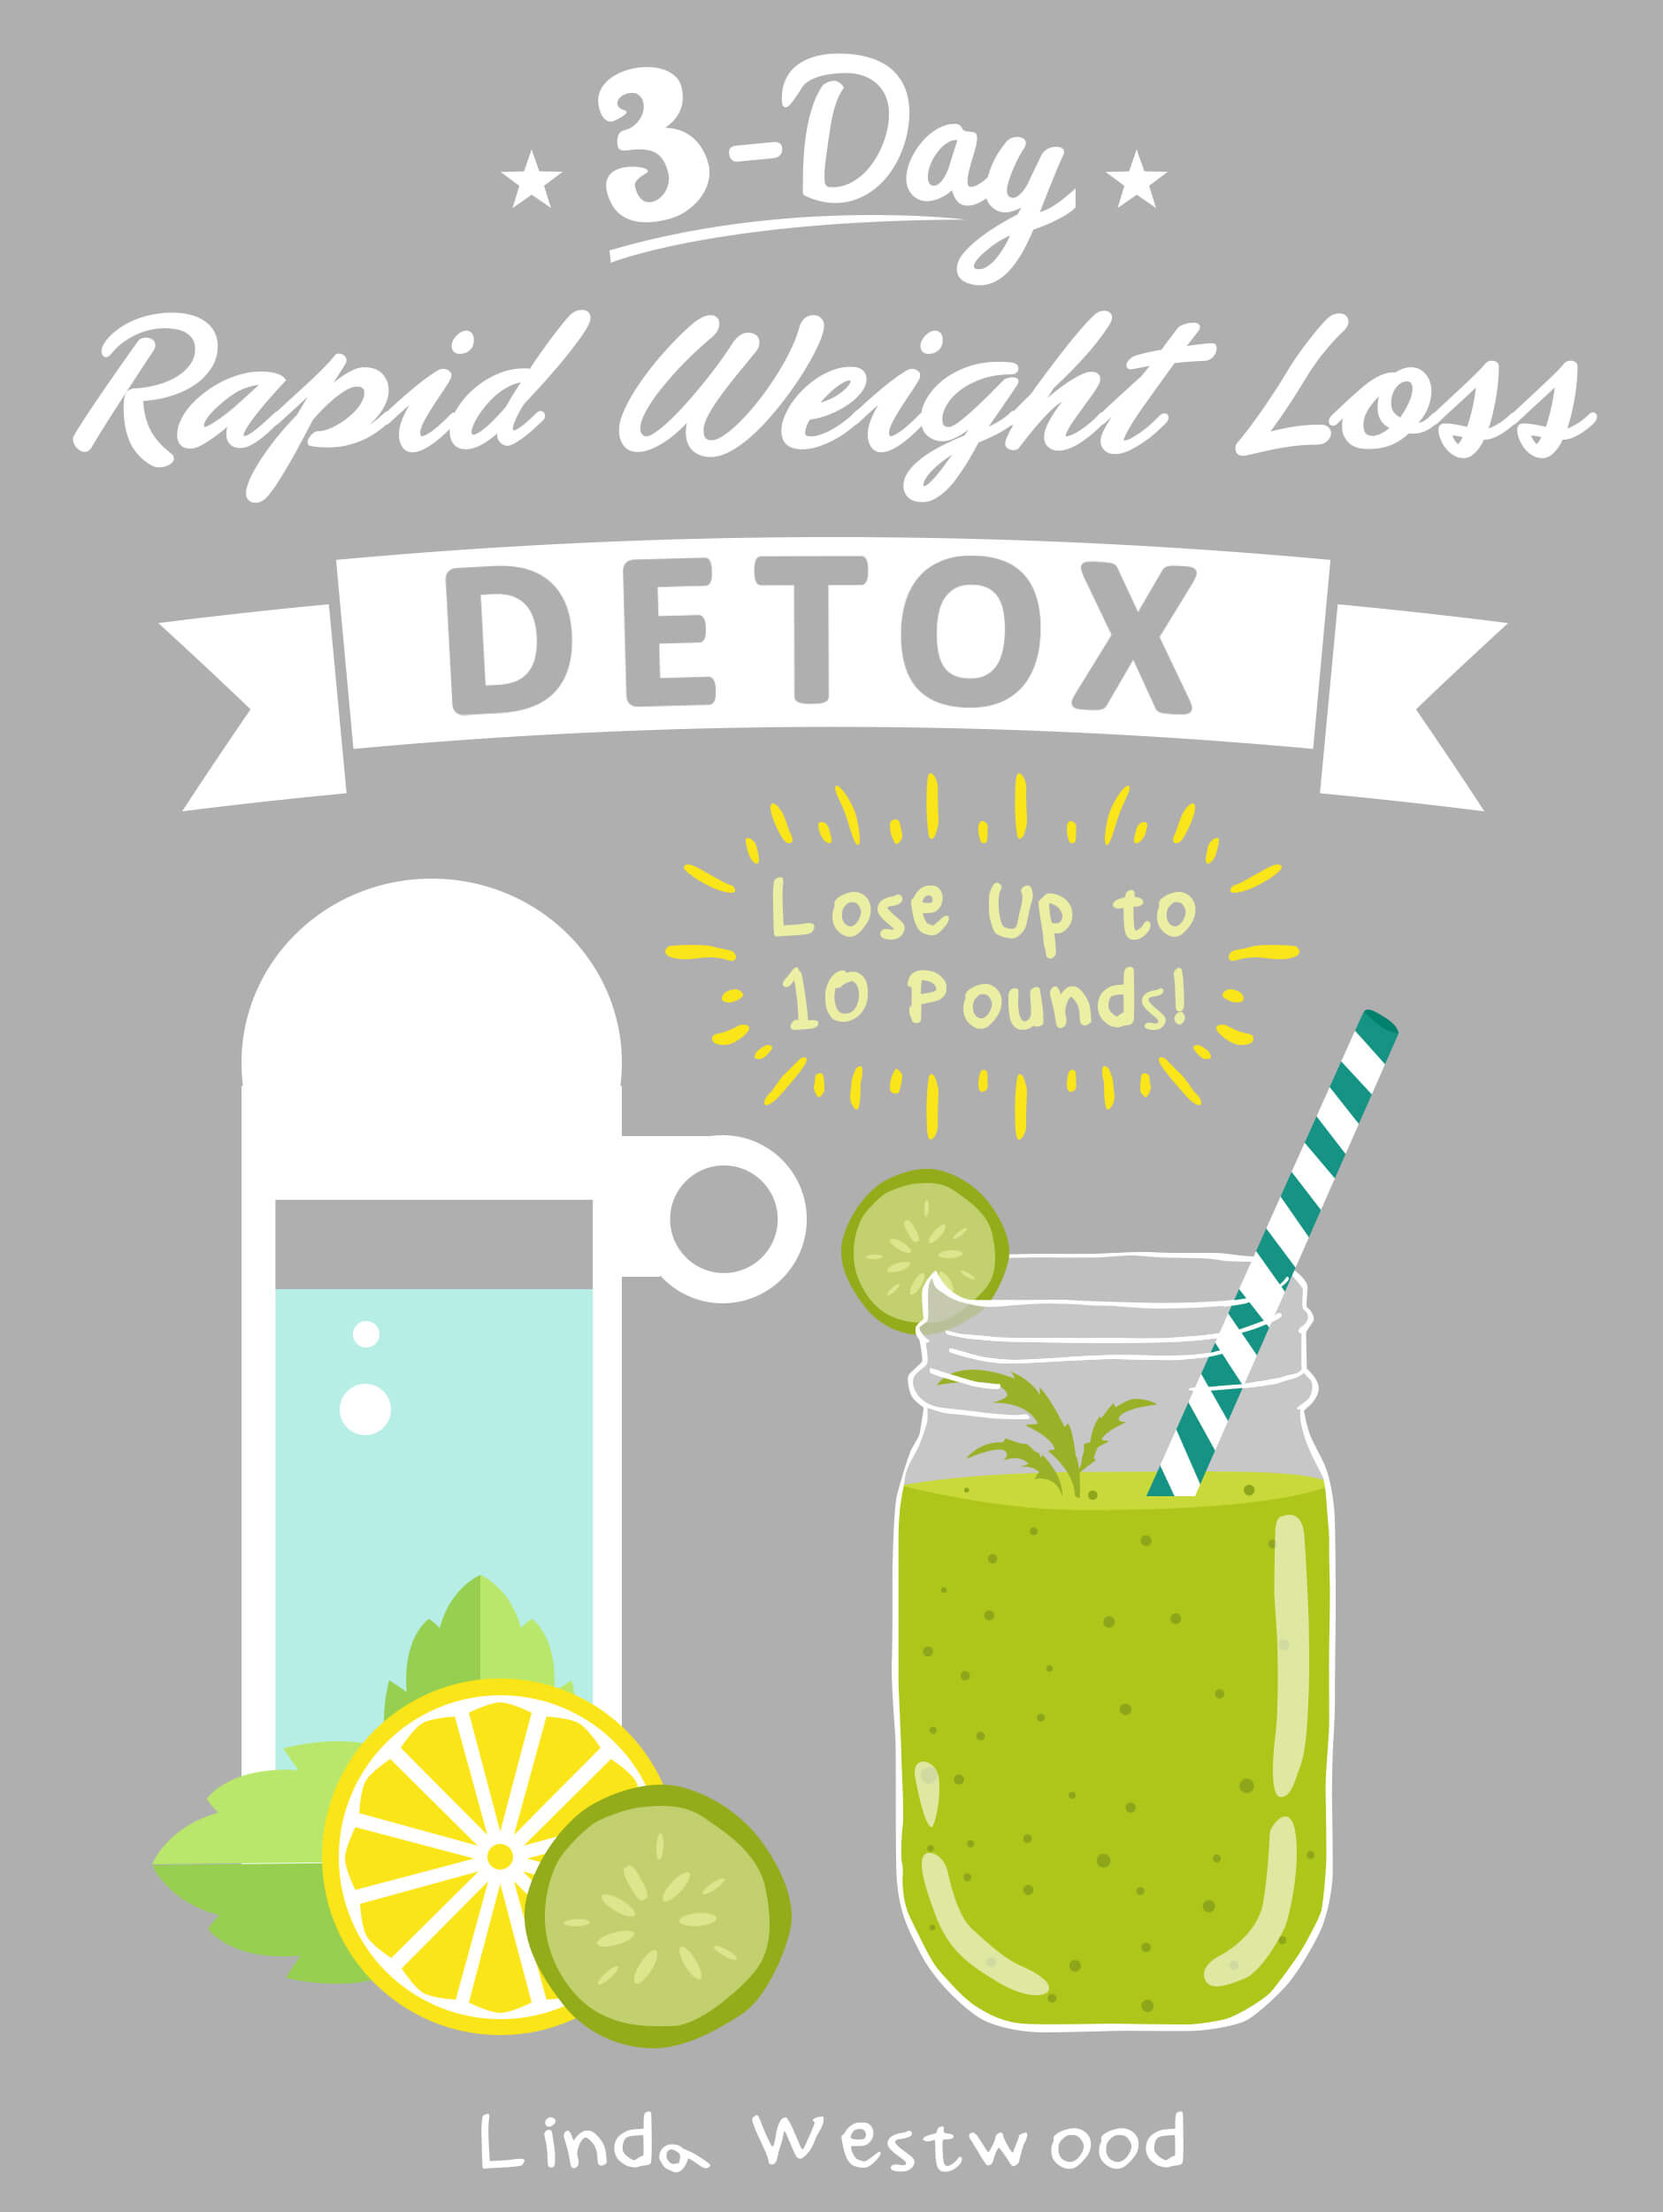 FREE: Detox (3rd Edition): 3-Day Rapid Weight Loss Detox Cleanse – Lose Up to 10 Pounds! by Linda Westwood